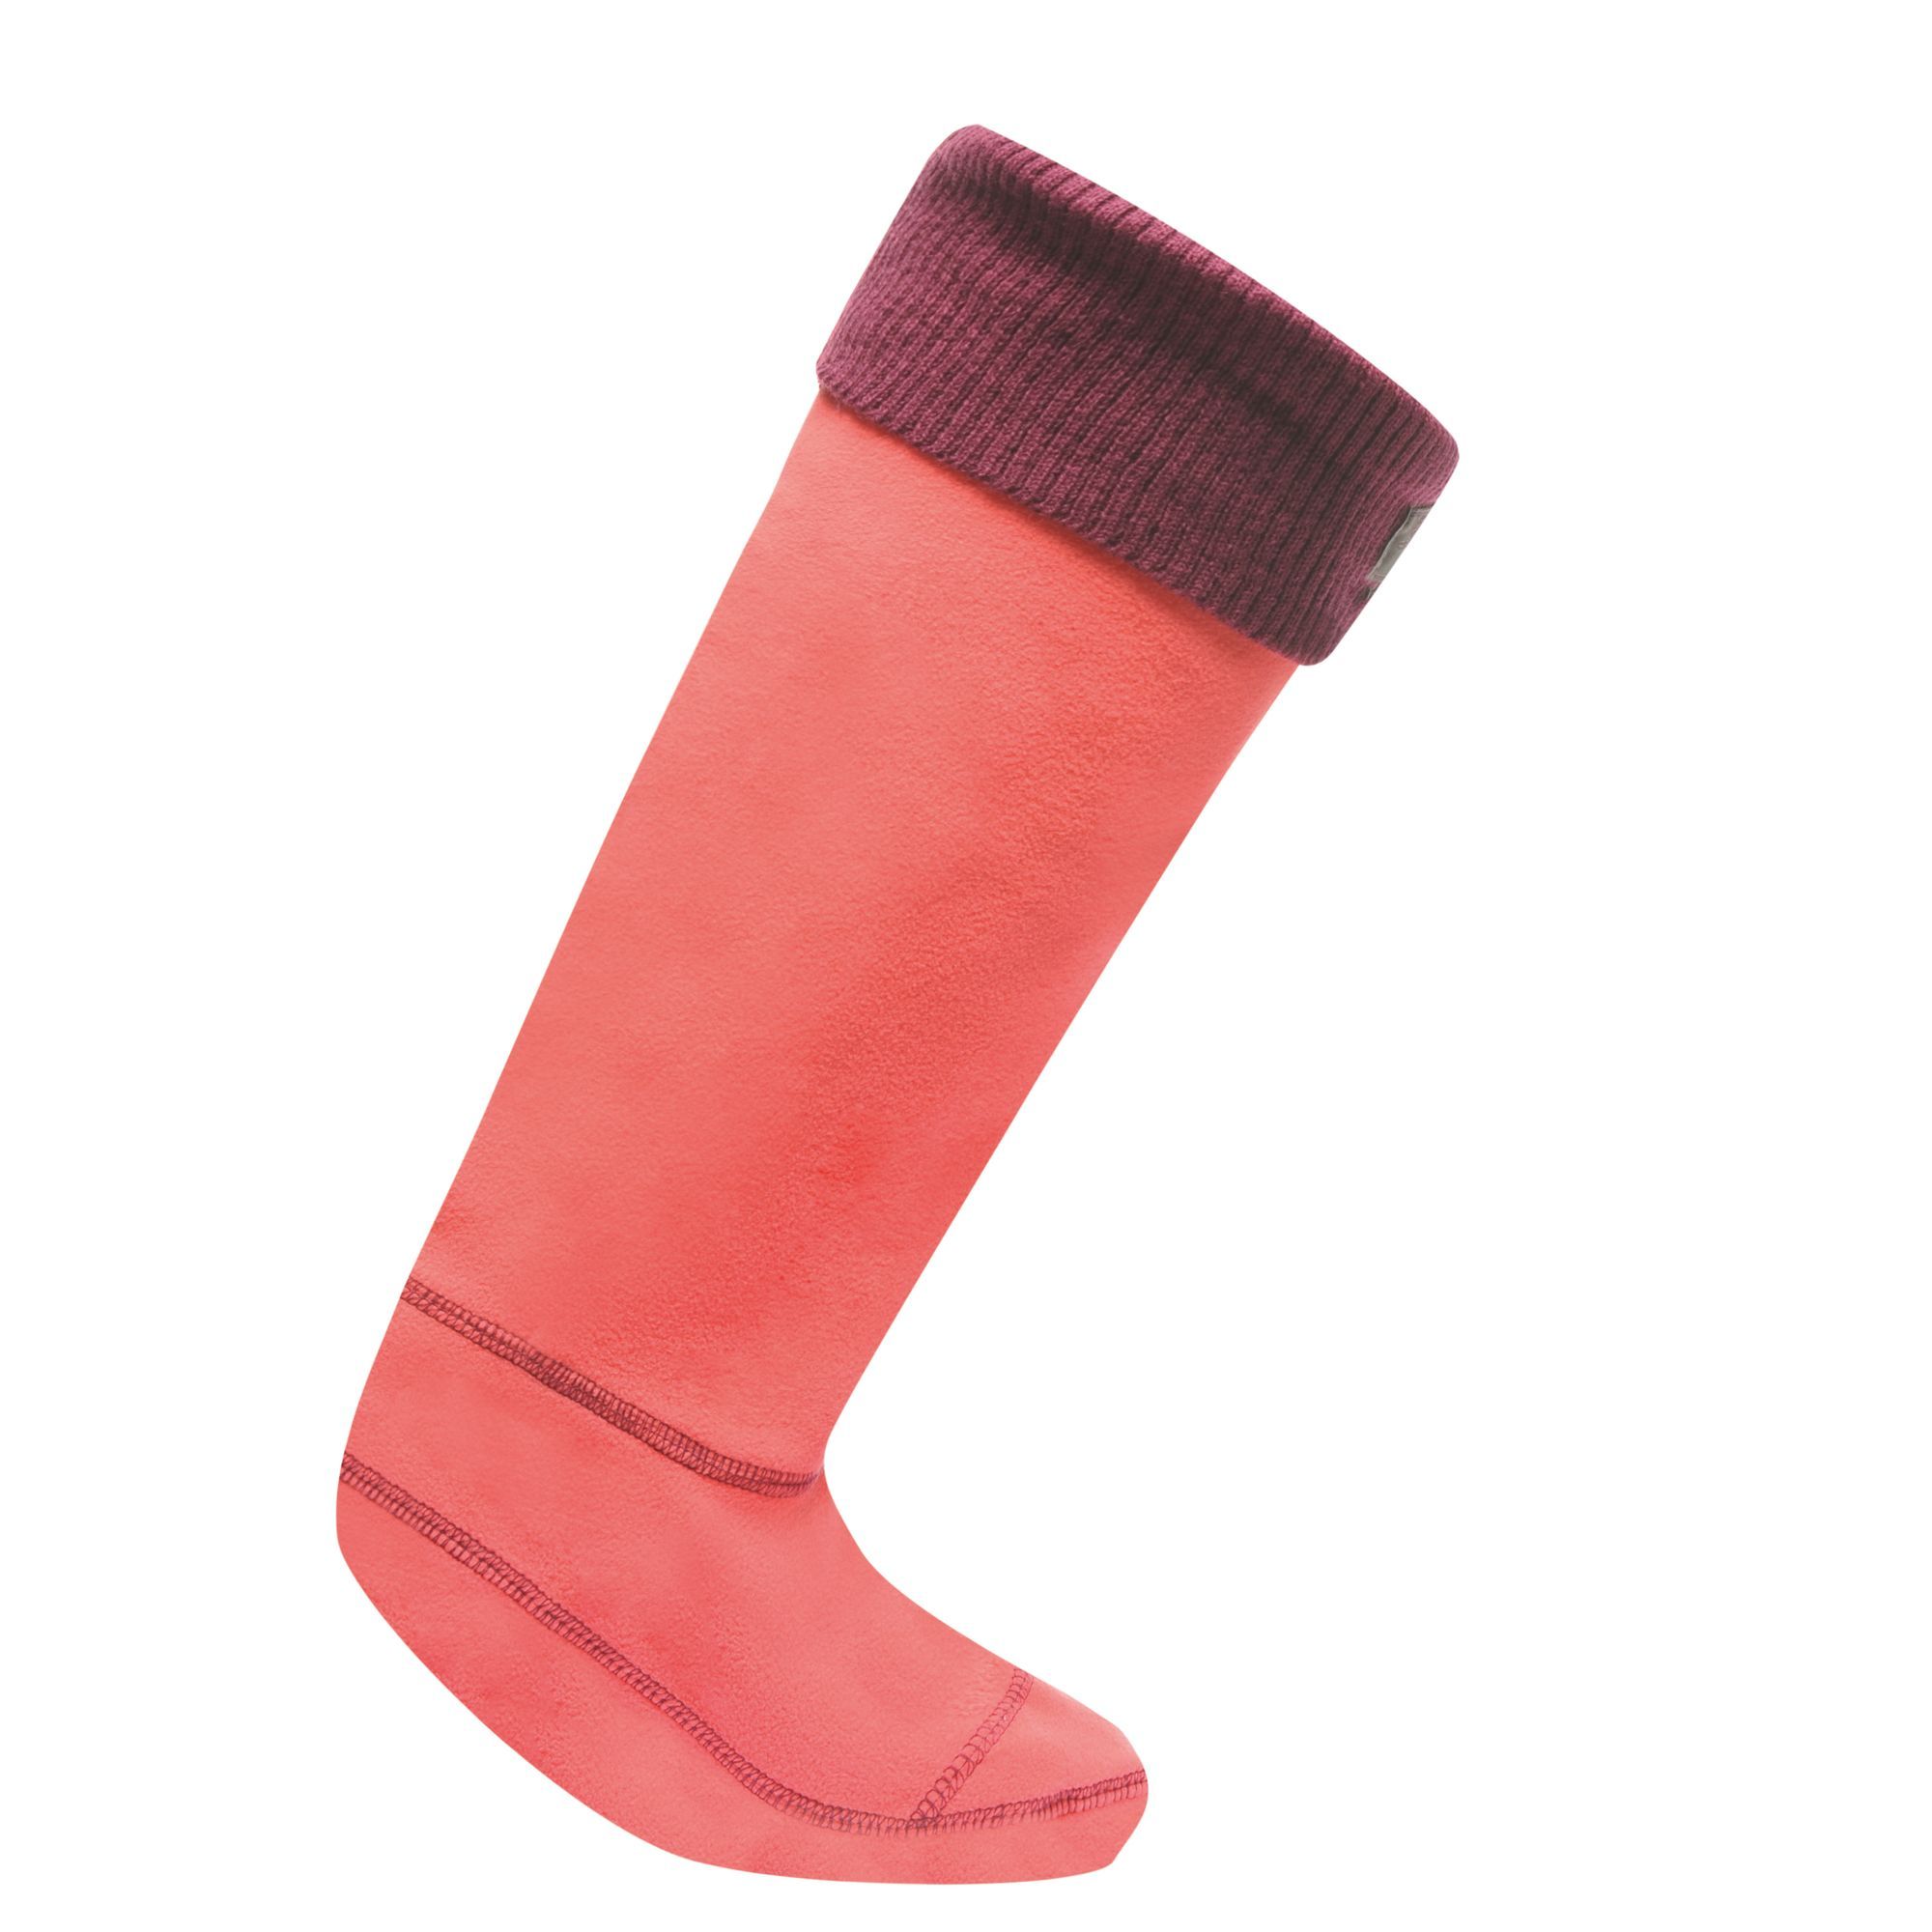 To be worn inside the wellington boot as a warm liner sock. Stylish chunky-knit cuff for snug fit. Sizes: S (3-4 UK), M (5-6 UK), L (7-8 UK). Outer: 100% Polyester, Cuff: 100% Acrylic.